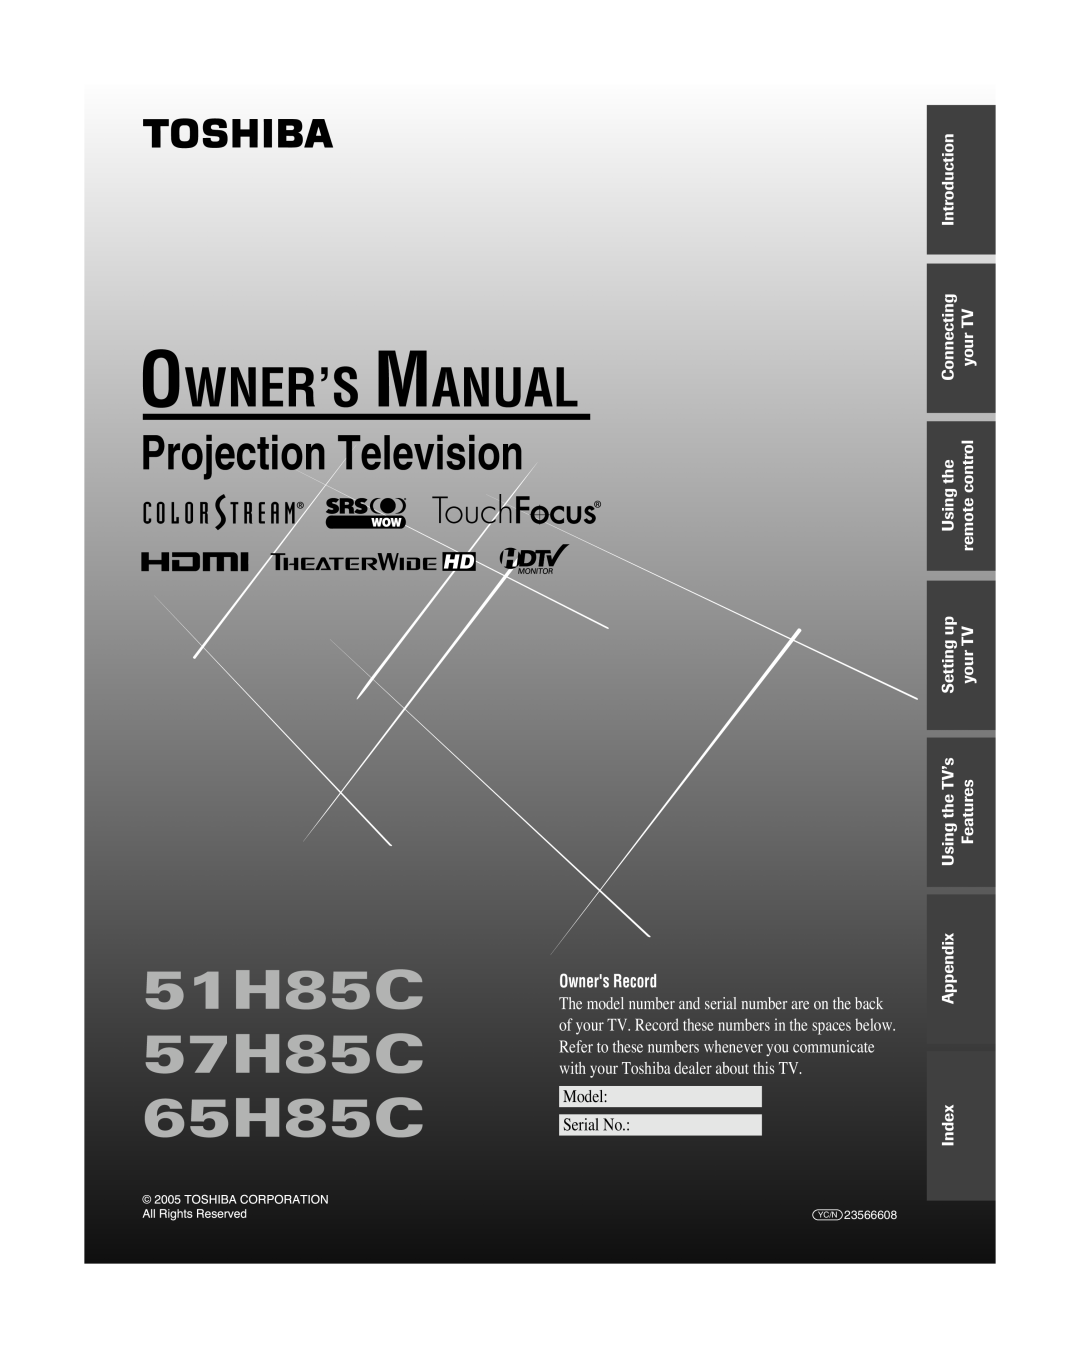 Toshiba owner manual 51H85C 57H85C 65H85C, Projection Television, Owners Record, Model Serial No, Introduction, yourTV 